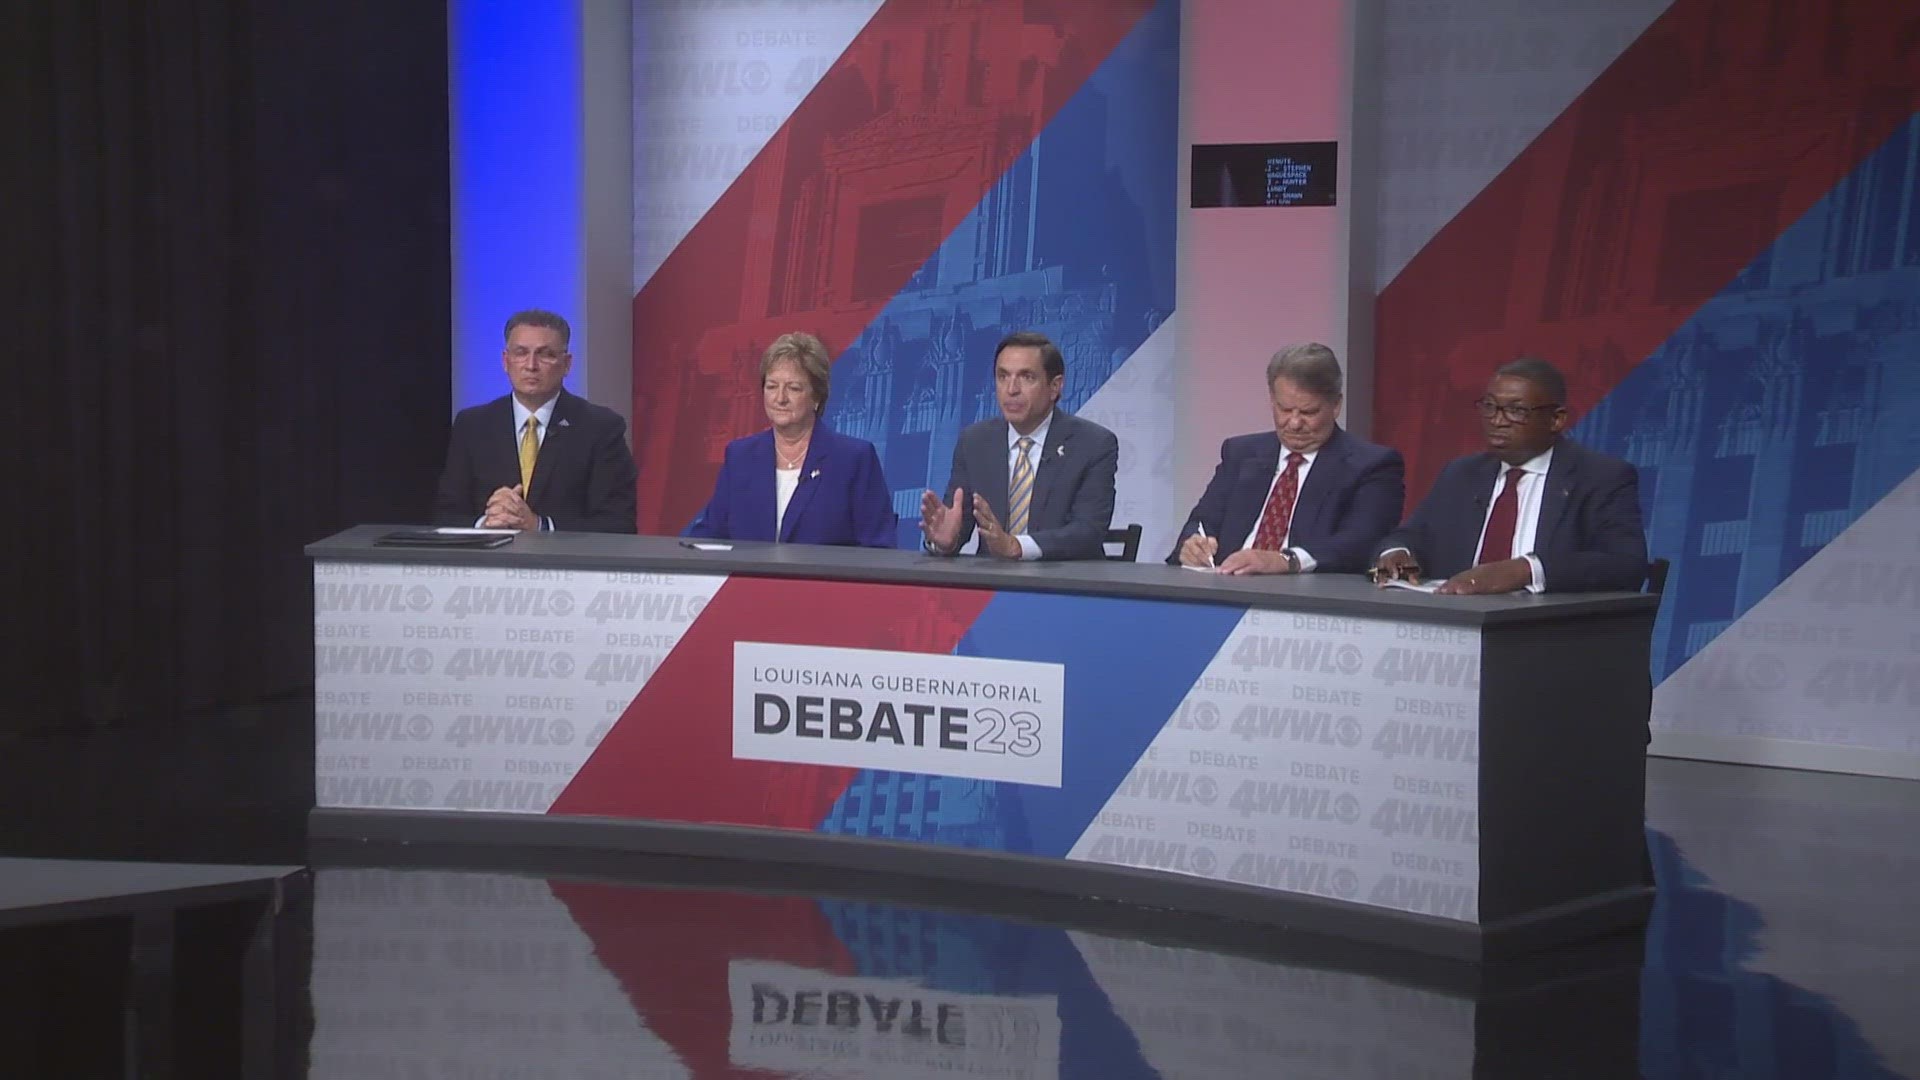 The candidates faced a wide range of questions on the state's future.